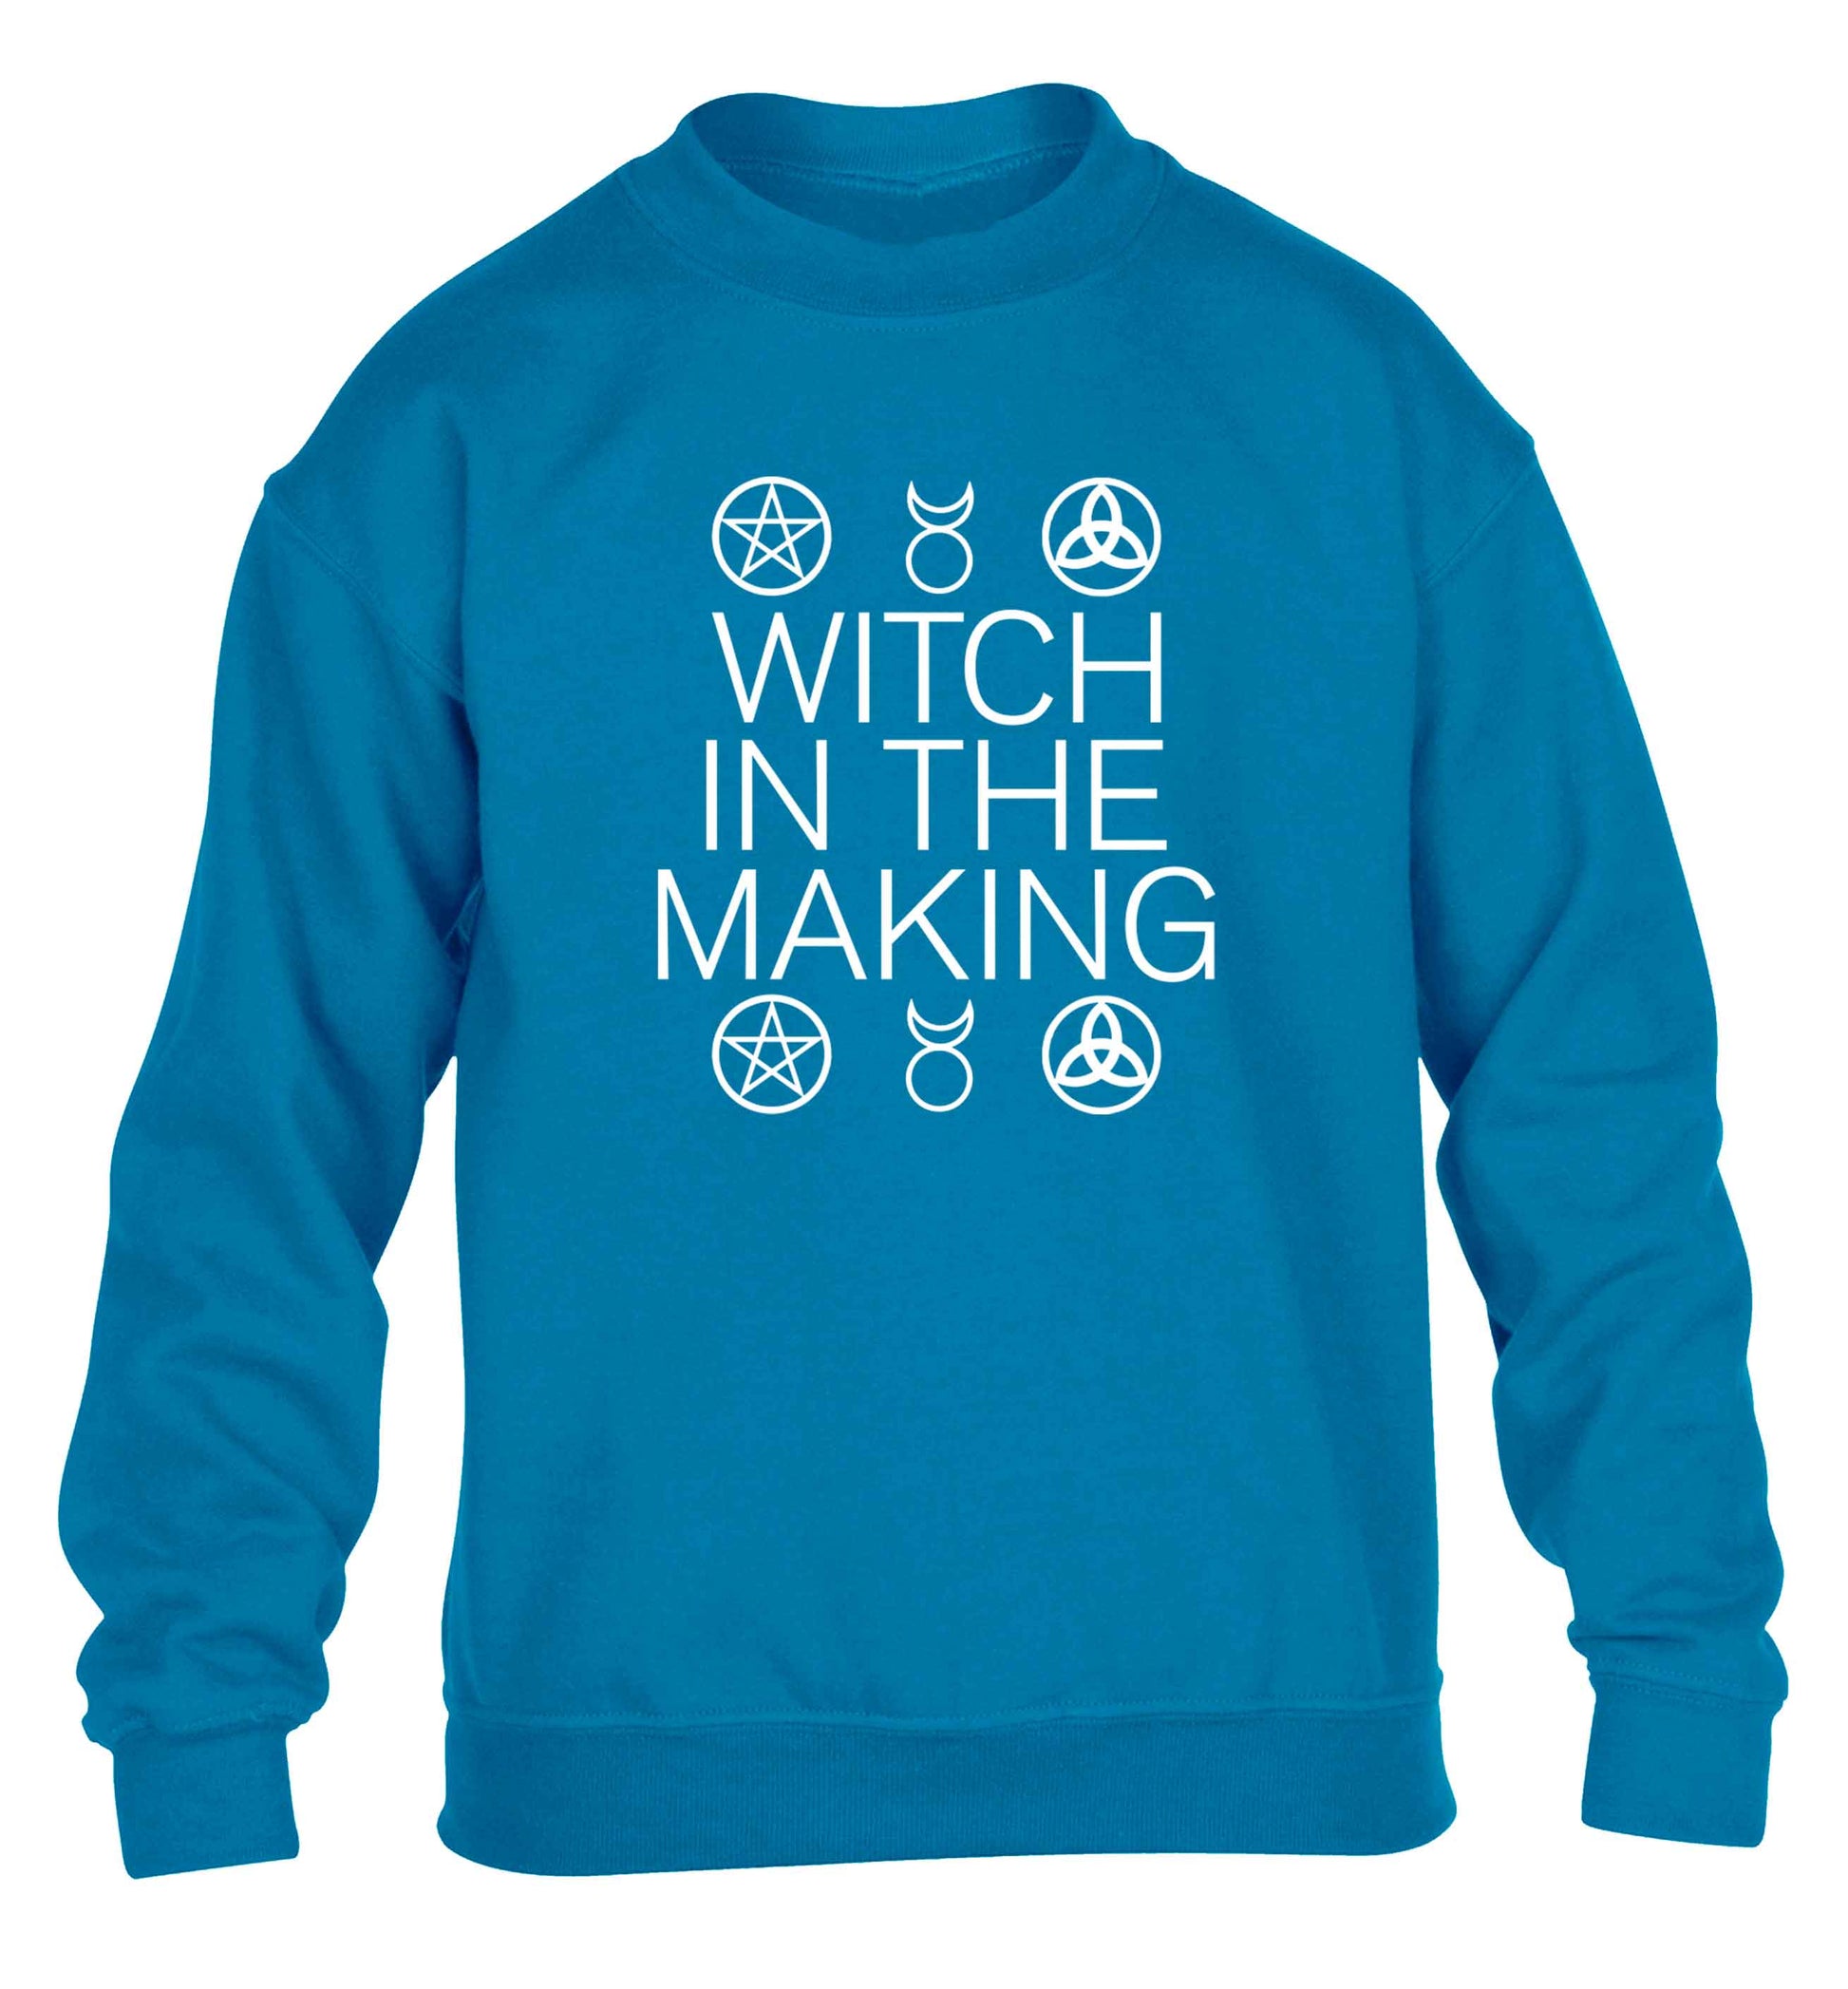 Witch in the making children's blue sweater 12-13 Years